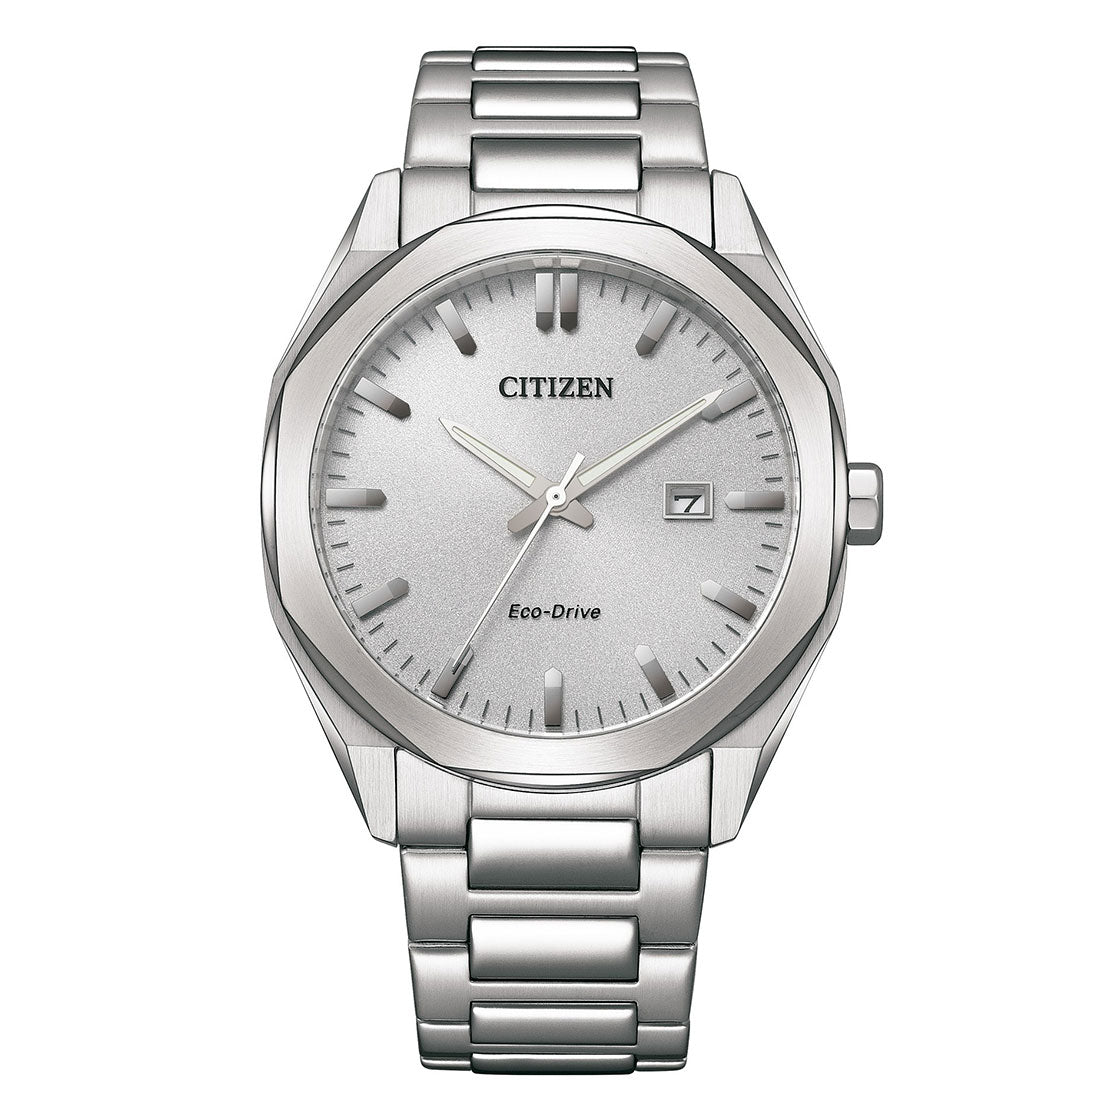 CITIZEN ECO-DRIVE GENTS WATCH SILVER DIAL - BM7600-81A - Kamal Watch Company